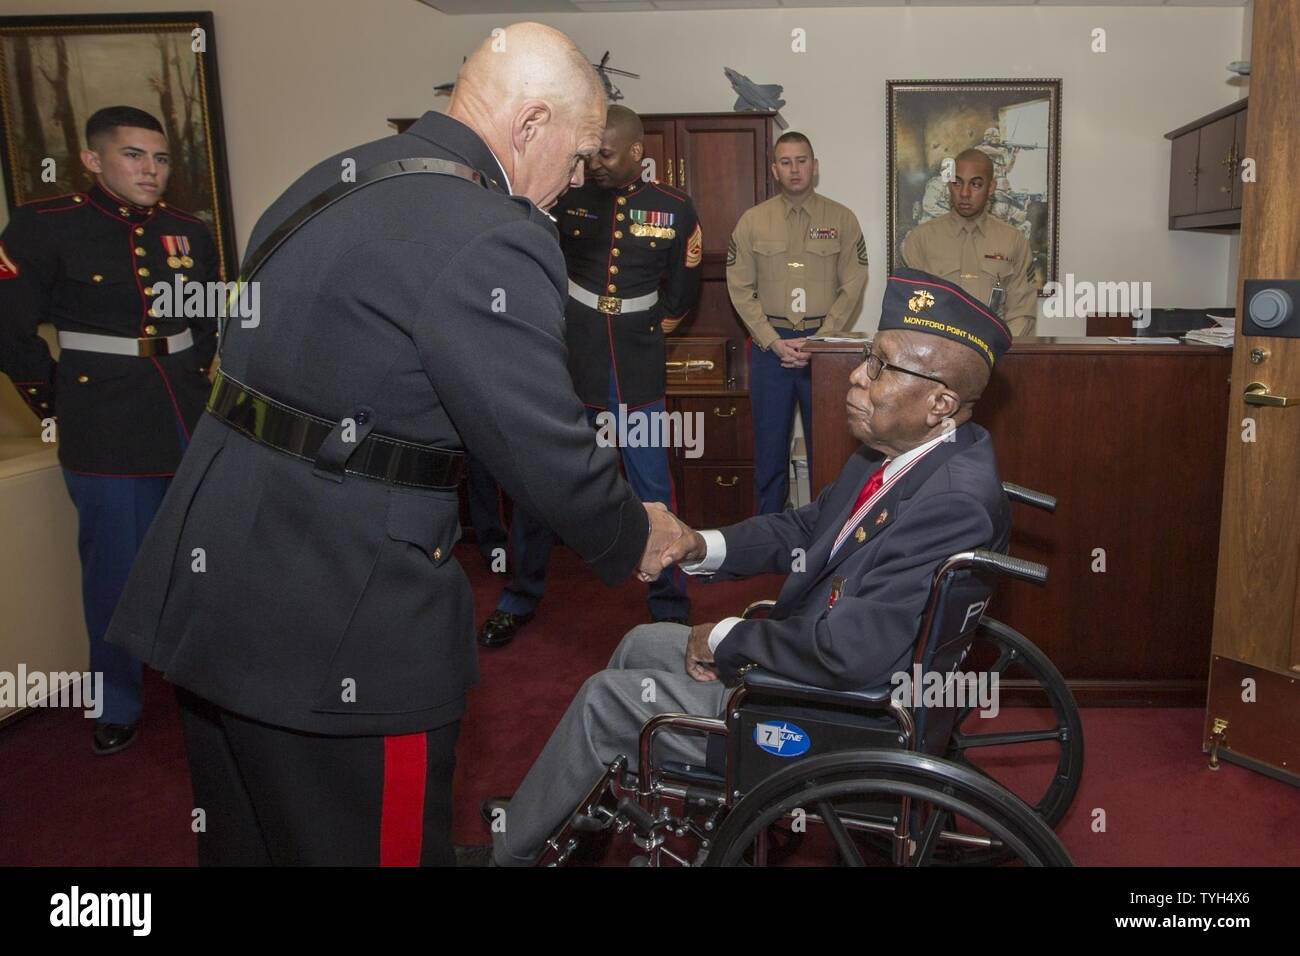 Commandant of the Marine Corps Gen. Robert B. Neller, left, shakes hands with retired Staff Sgt. Charles G. Manuel, Jr., before a cake cutting ceremony in observance of the Marine Corps’ birthday, Arlington, Va., Nov. 9, 2016. Manuel, 93, served in the U.S. Marine Corps from 1942 to 1946 and was the oldest Marine present at the ceremony. Stock Photo